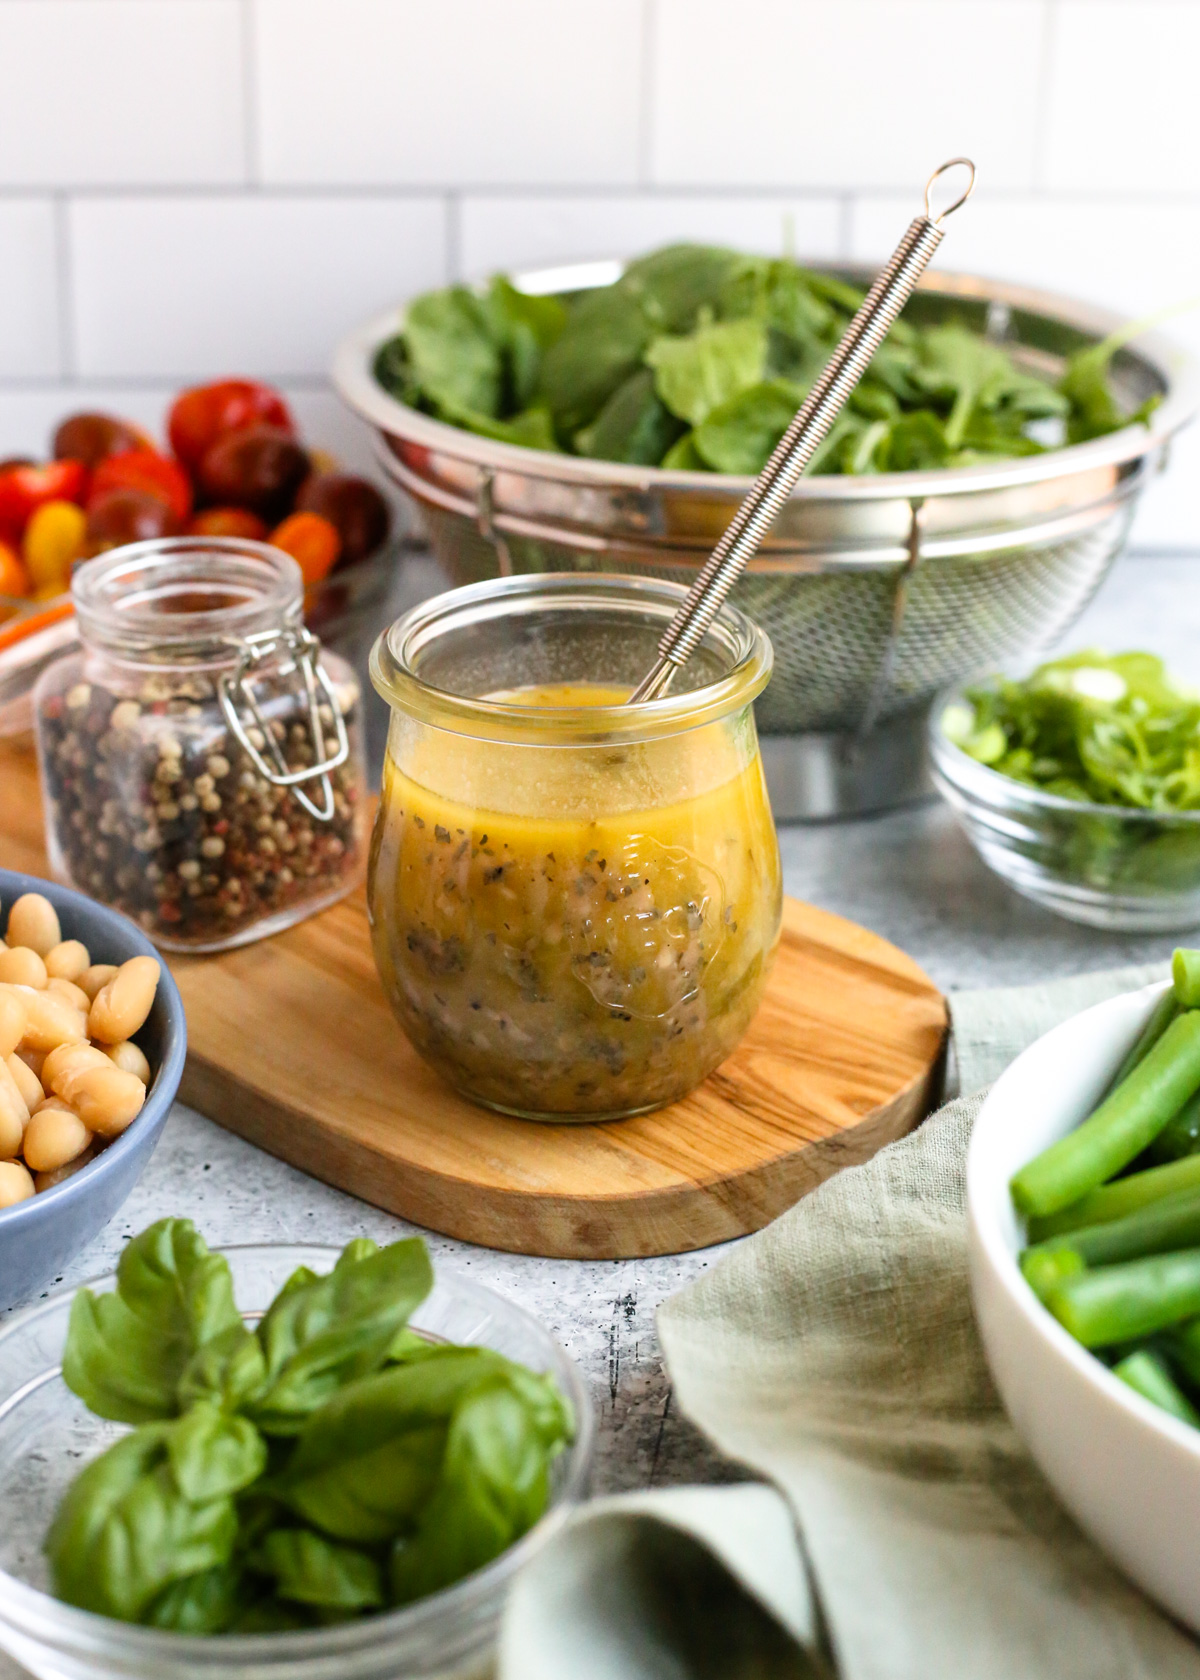 A small glass jar filled with a homemade red wine vinaigrette is sitting on small wooden display board and surrounded by various colorful fresh vegetables as if in preparation to make a delicious, fresh salad